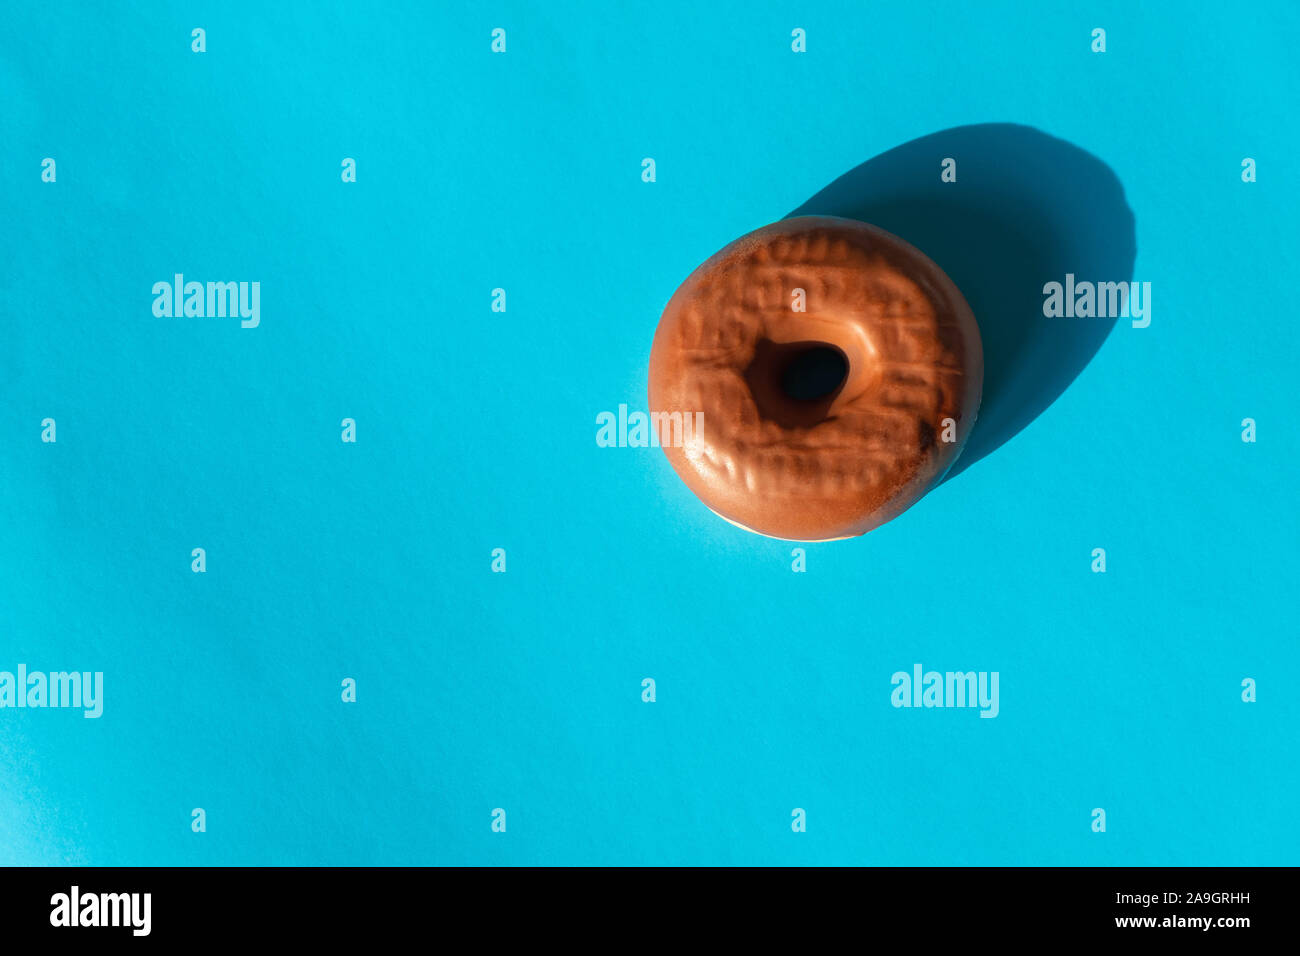 Chocolate frosted donut on bright blue background Stock Photo